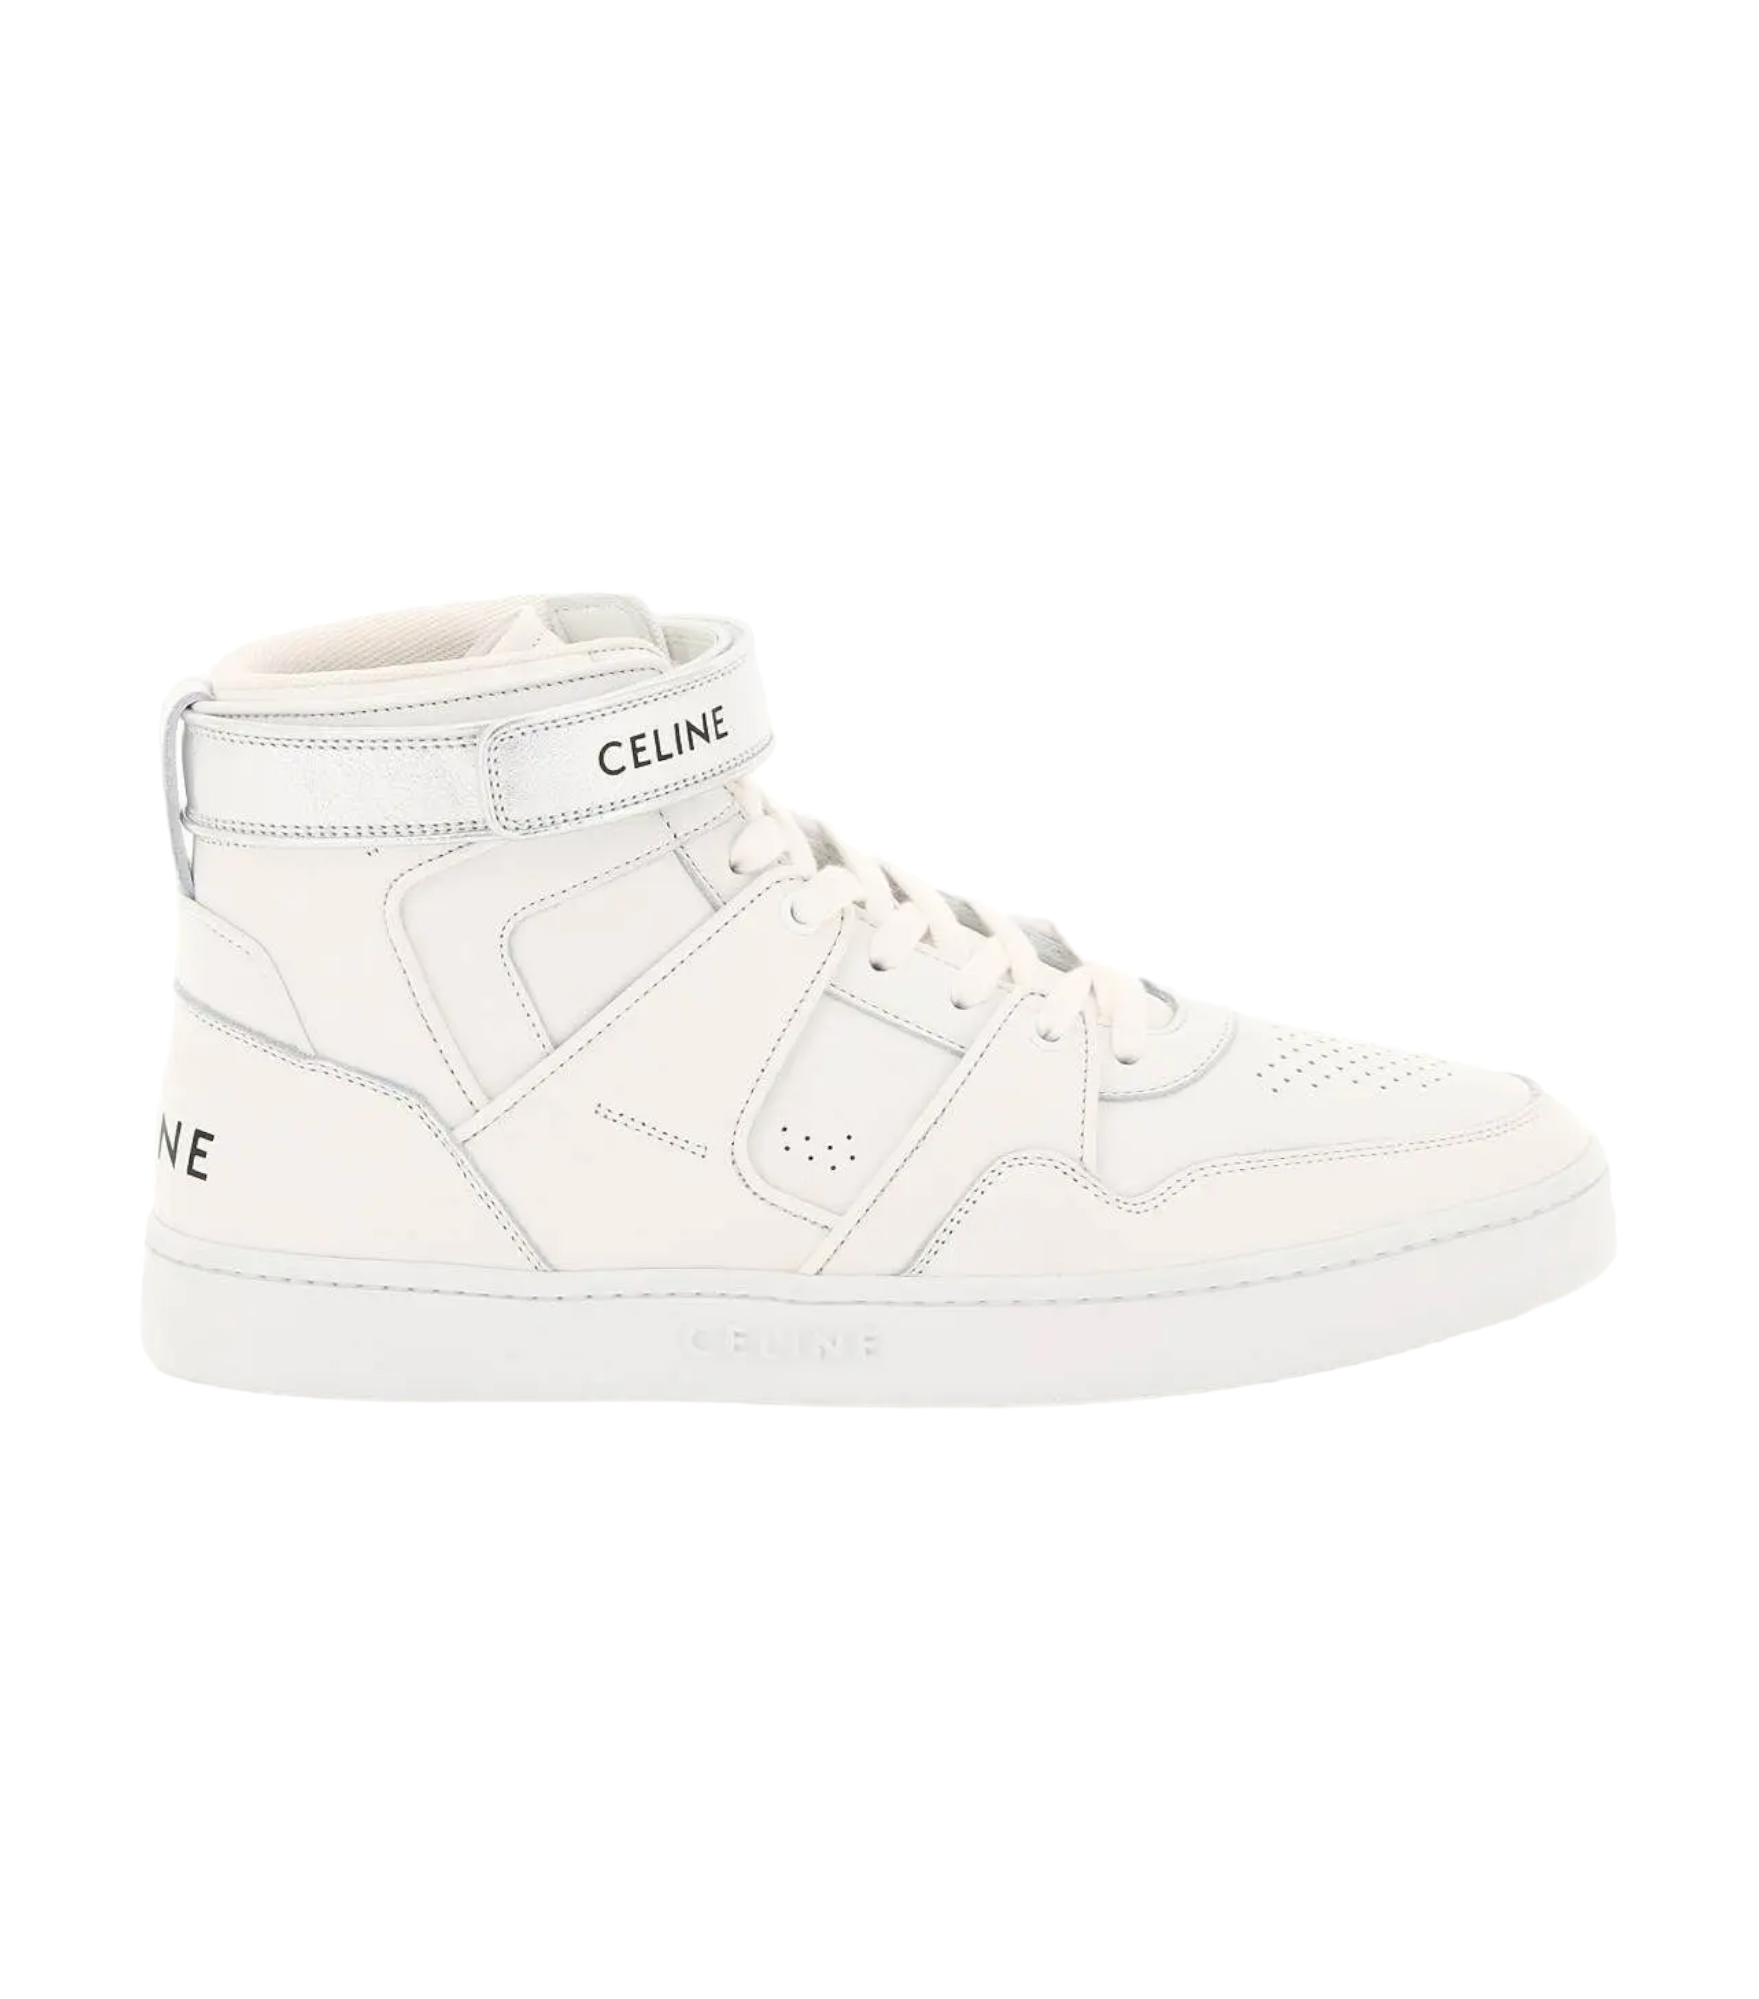 Celine CT-05 Leather High-Top Sneakers